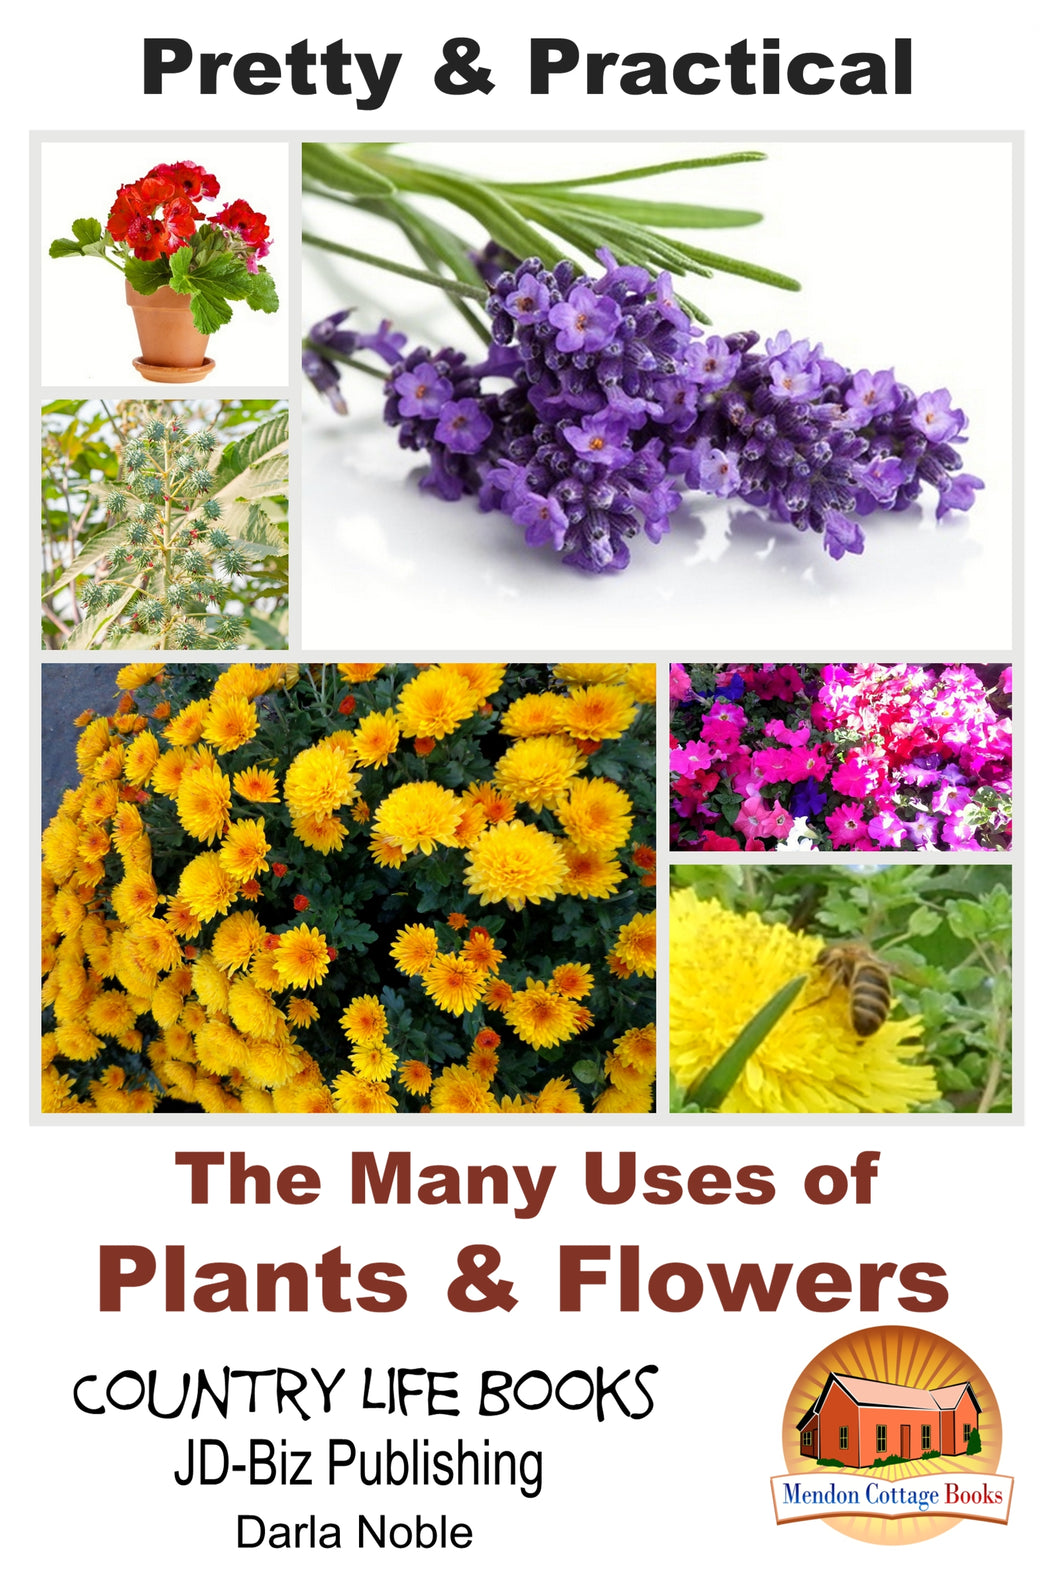 Pretty & Practical - The Many Uses of Plants & Flowers